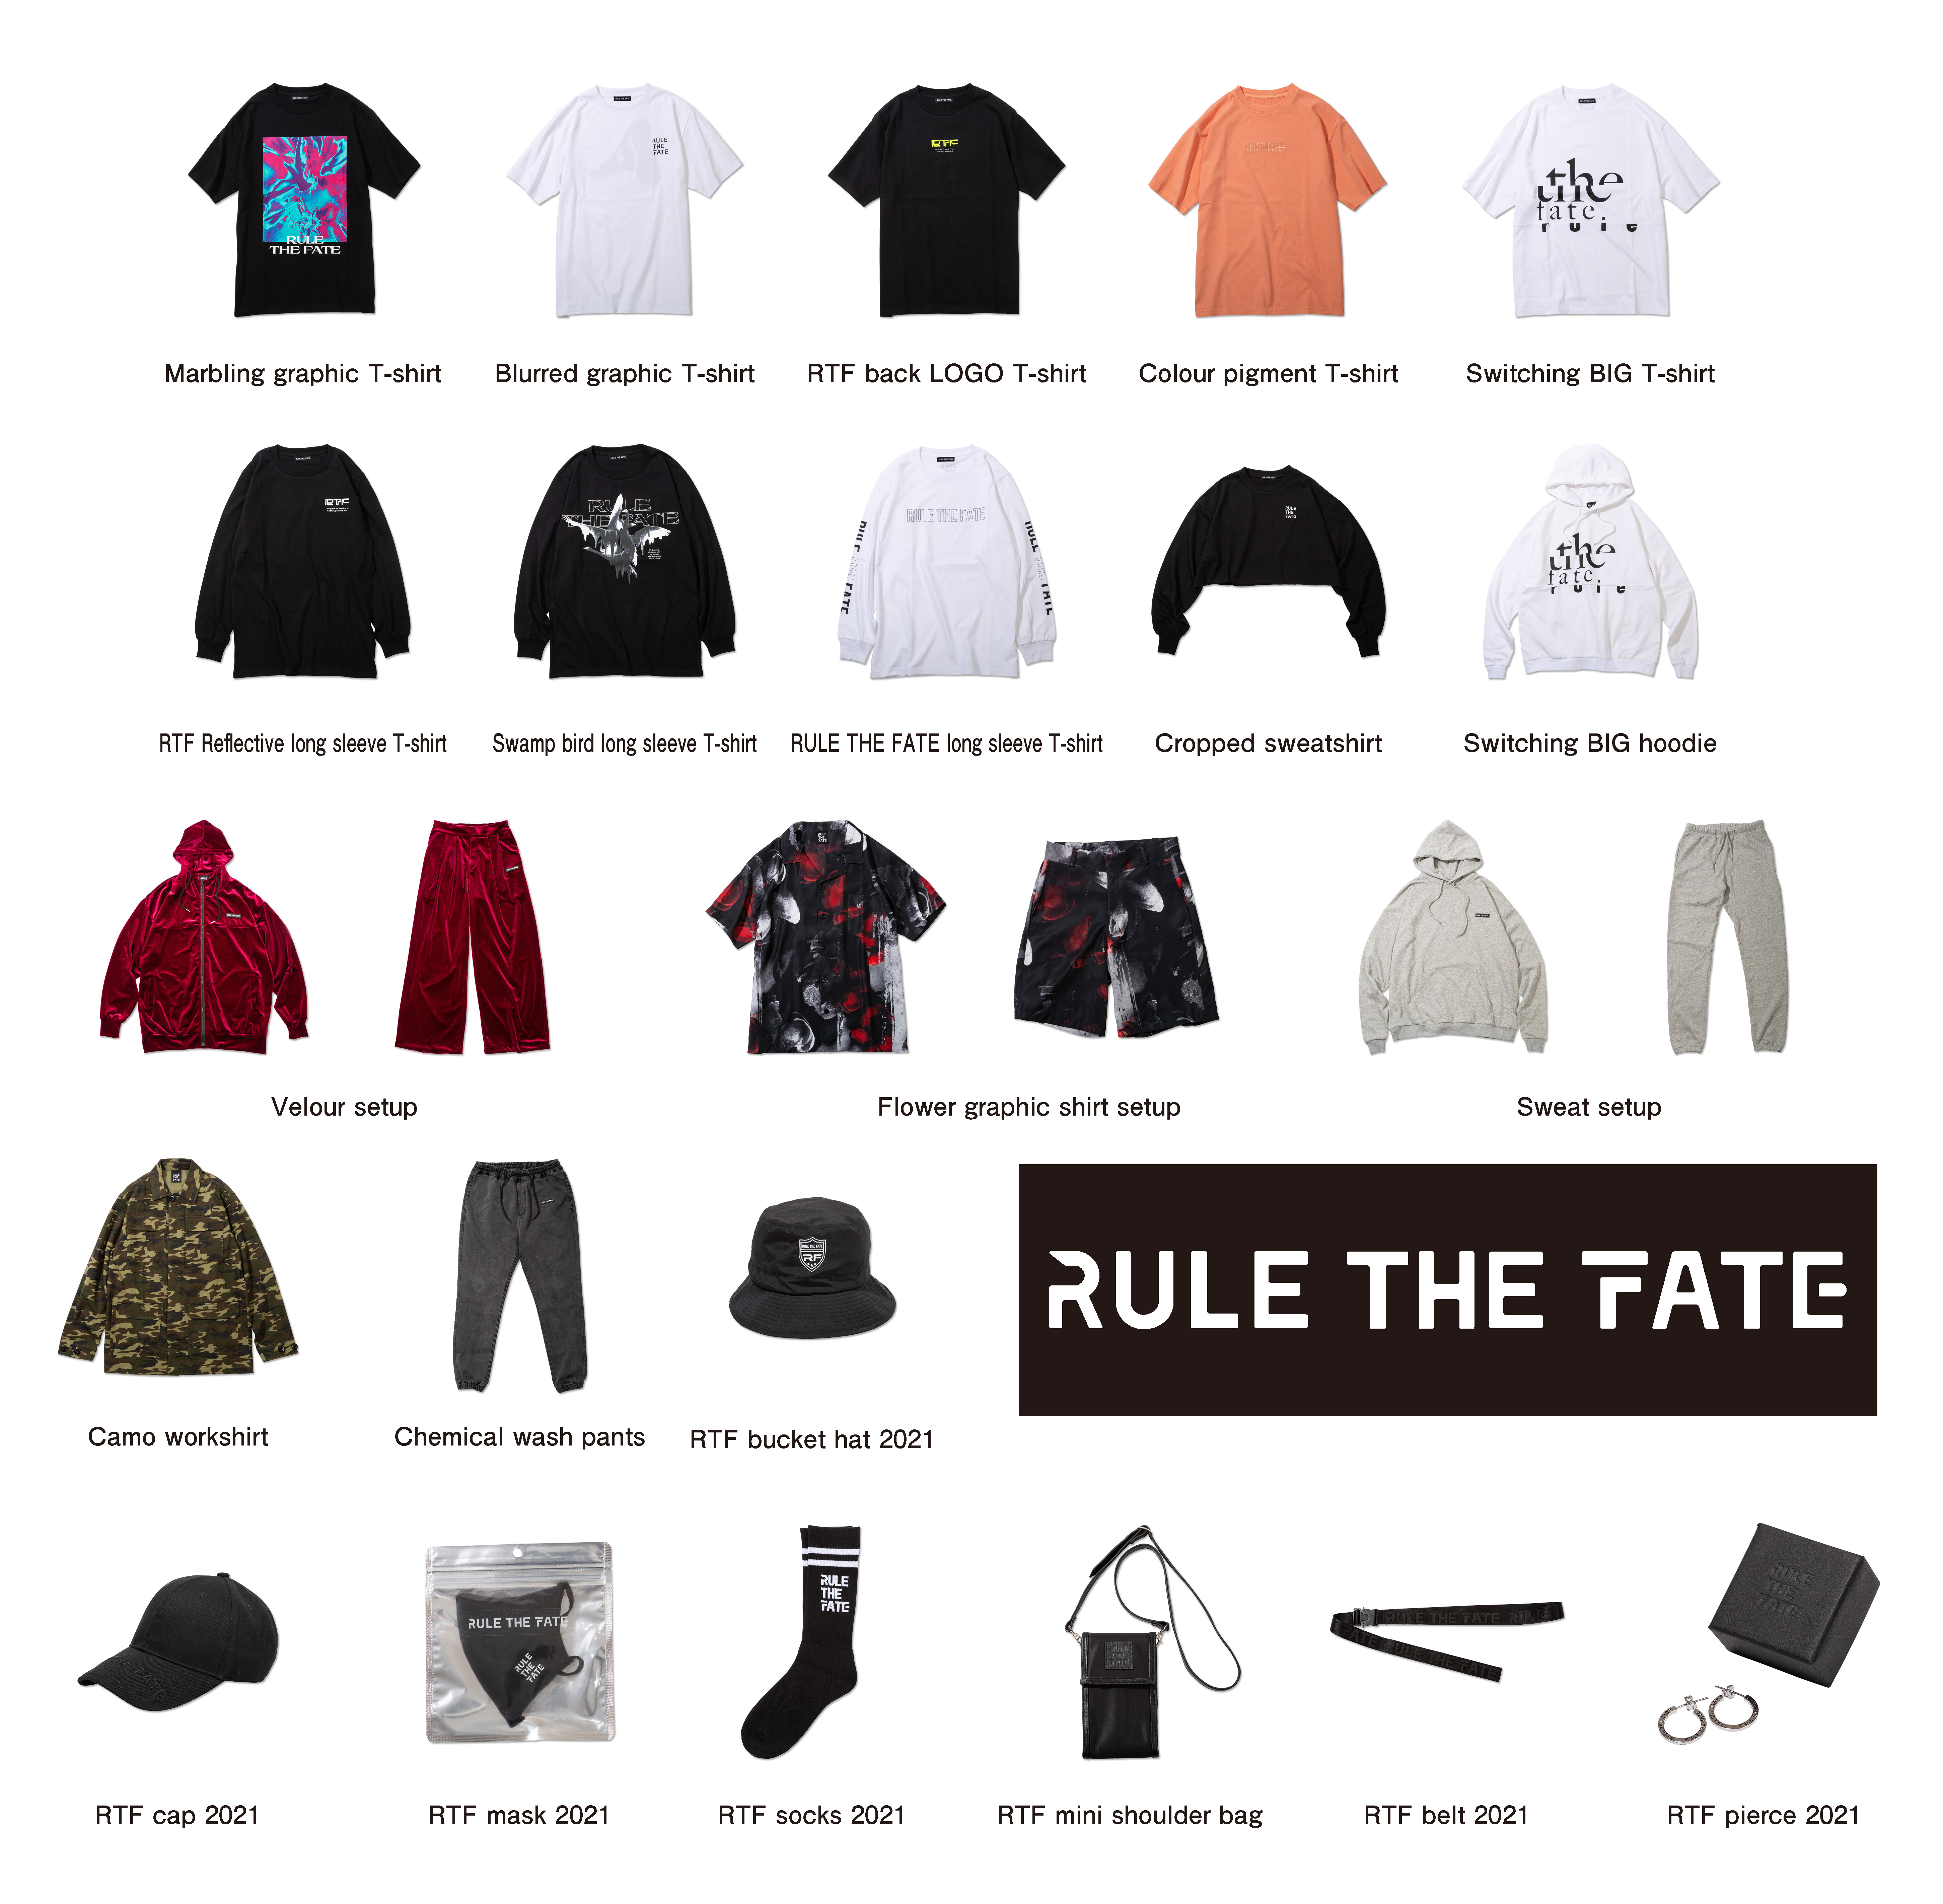 RULE THE FATE Flower graphic shirt setup